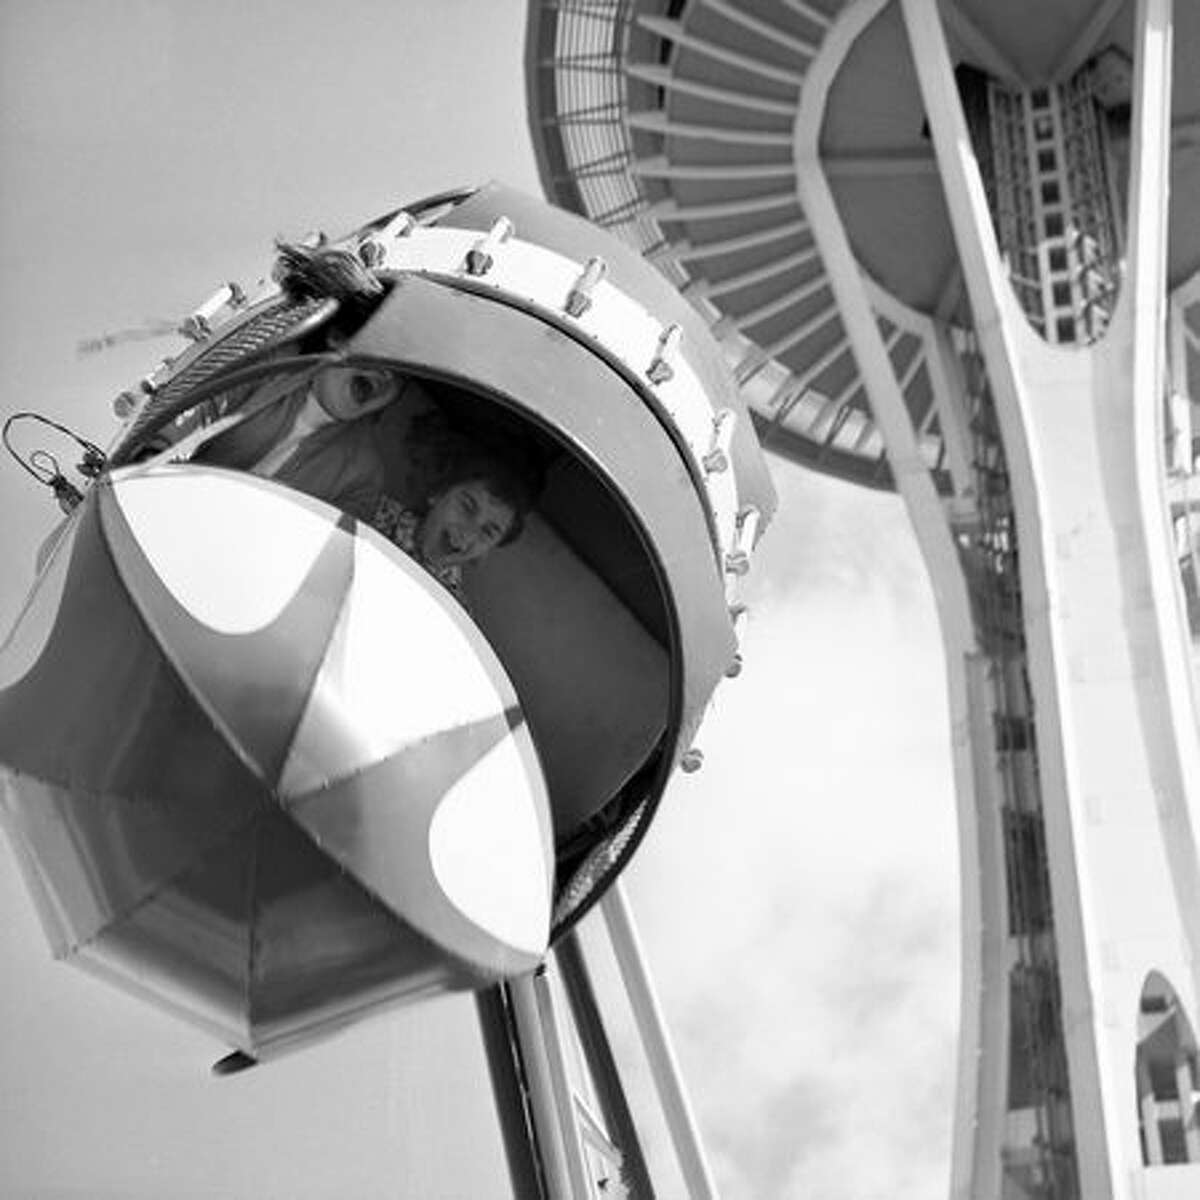 The Seattle Center's Fun Forest, which was initially formed as the Gayway entertainment area for the 1962 World's Fair, added major rides in 1964 to what had been primarily an assortment of carnival games. In this spring 1965 photo, Mary Anne Norton, age 13, and Kristy Davis, 12, enjoy the Rolo Plane. (Seattlepi.com file/MOHAI collection)